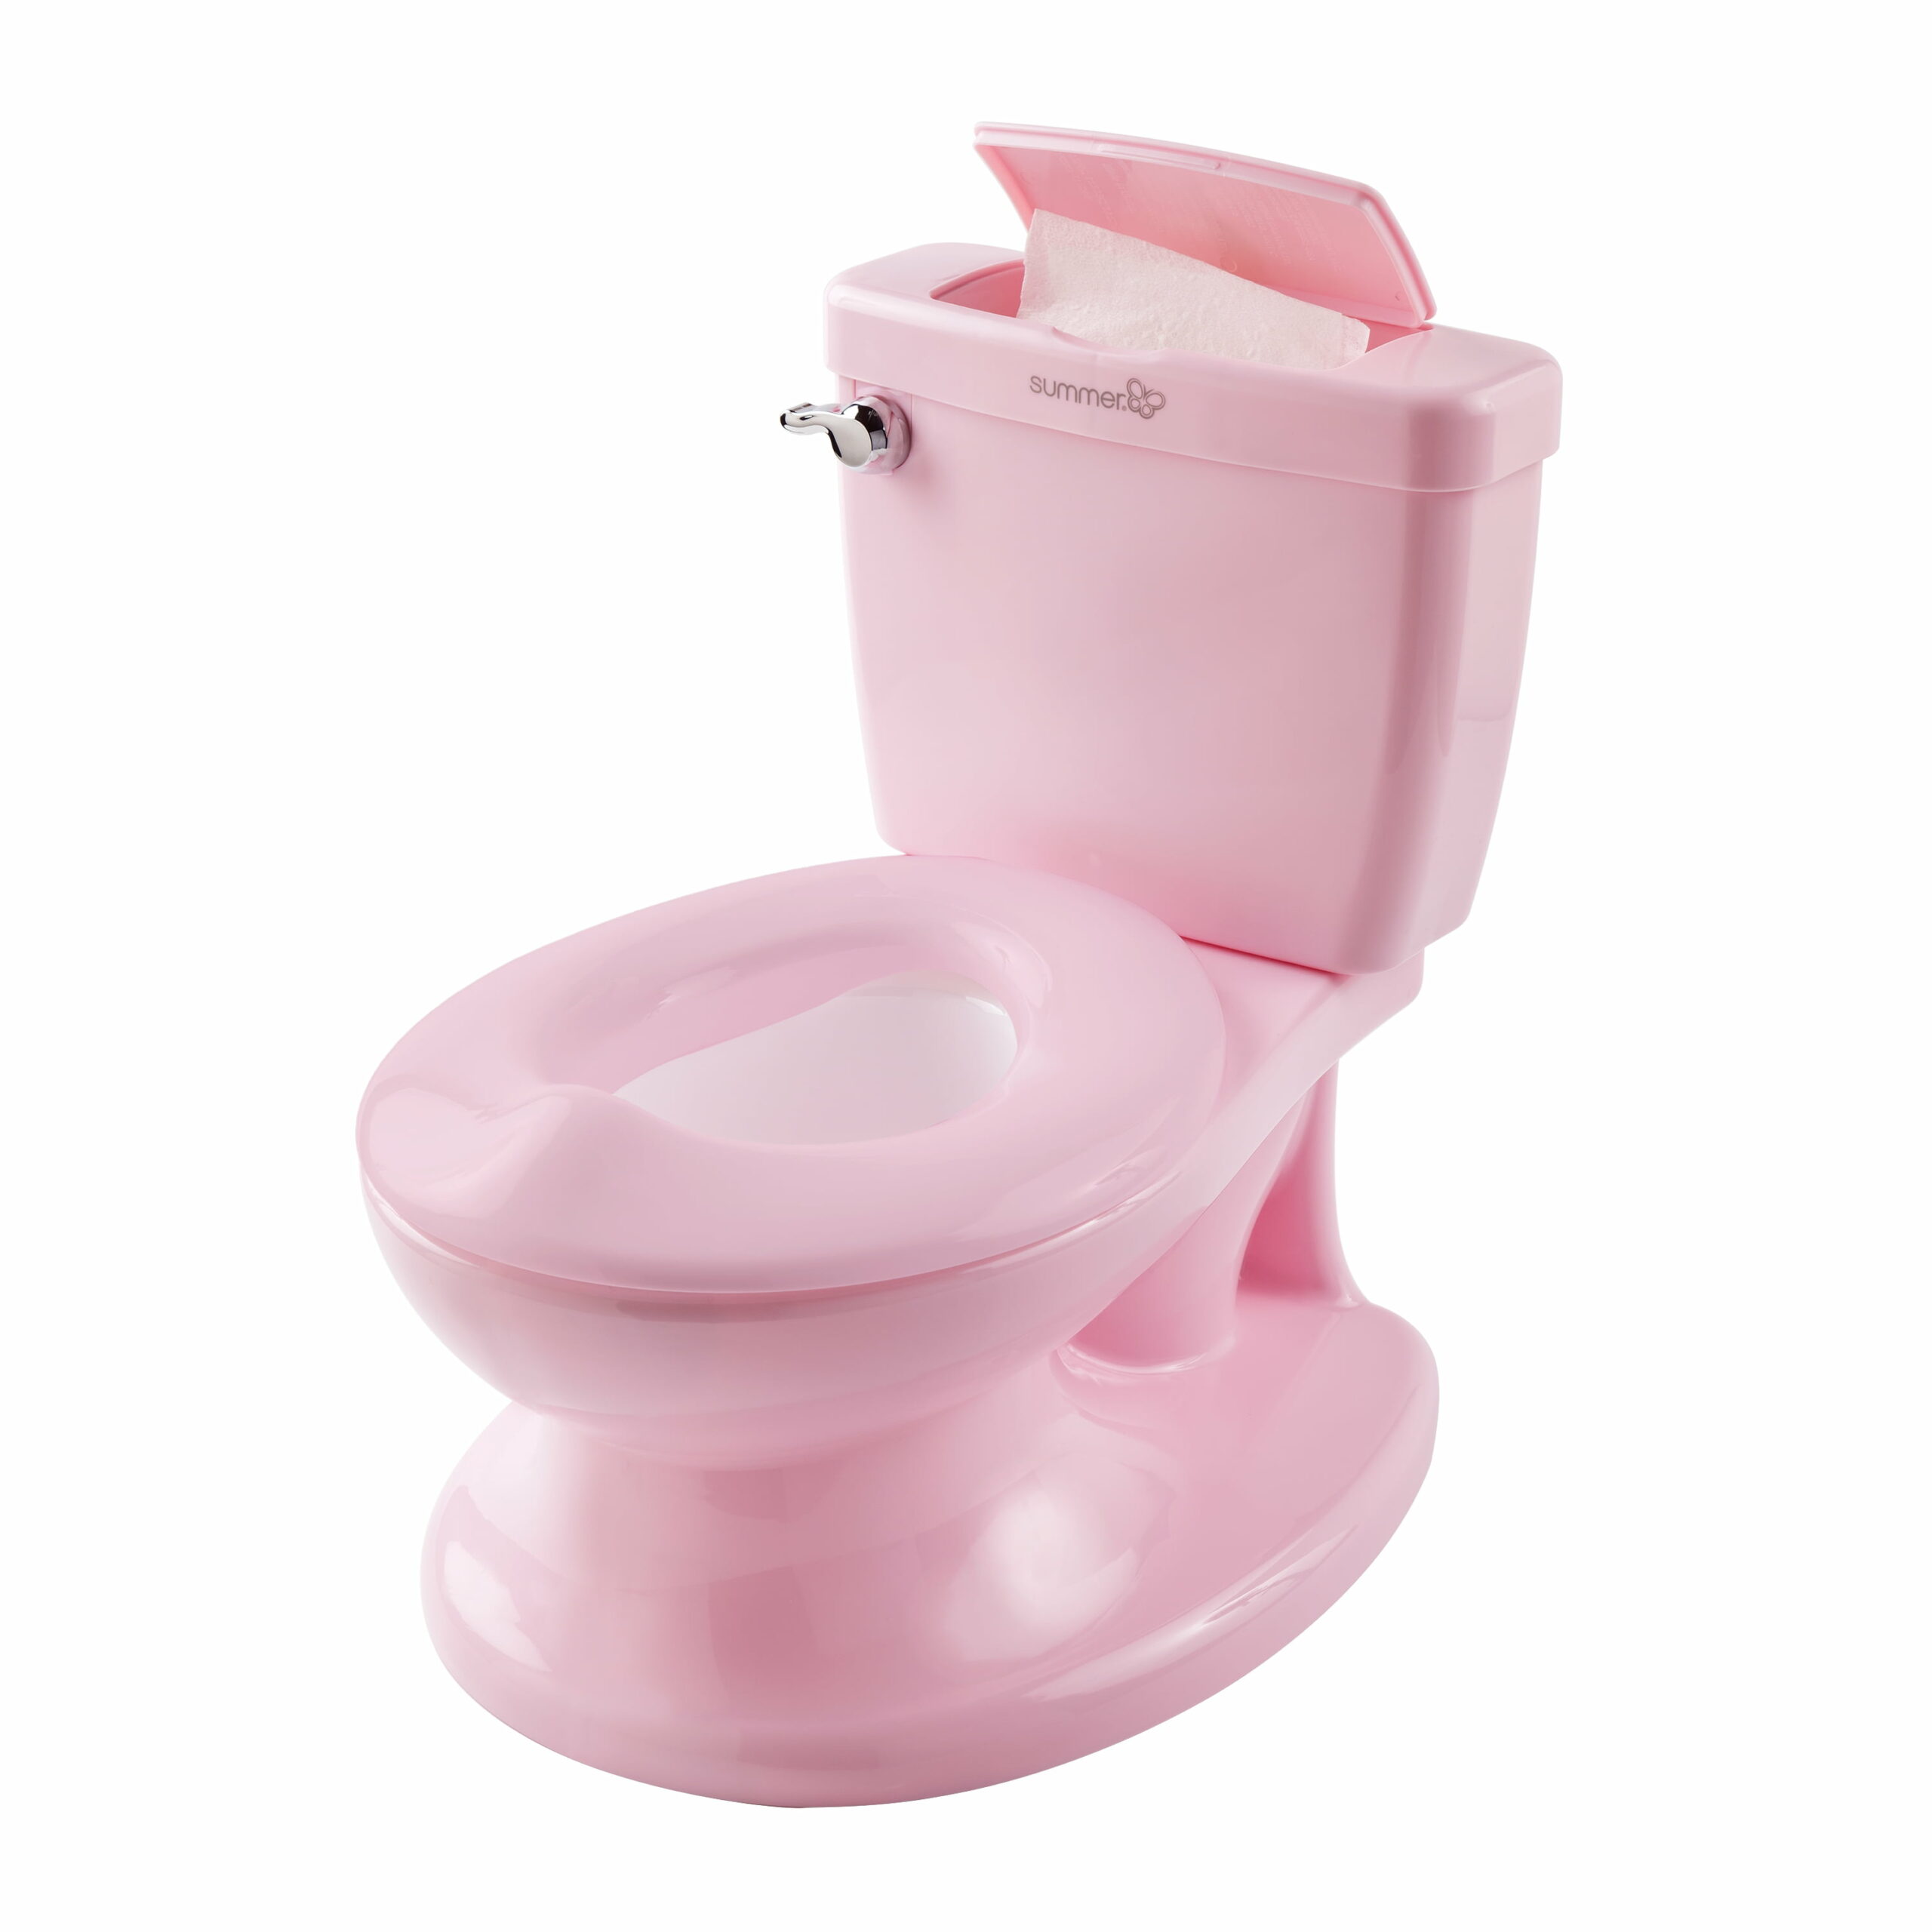 baby pink toilet mat Potty pink summer toilet training infant toddler girls chairs seats step chair walmart neutral book wipe dispenser sounds flushing details